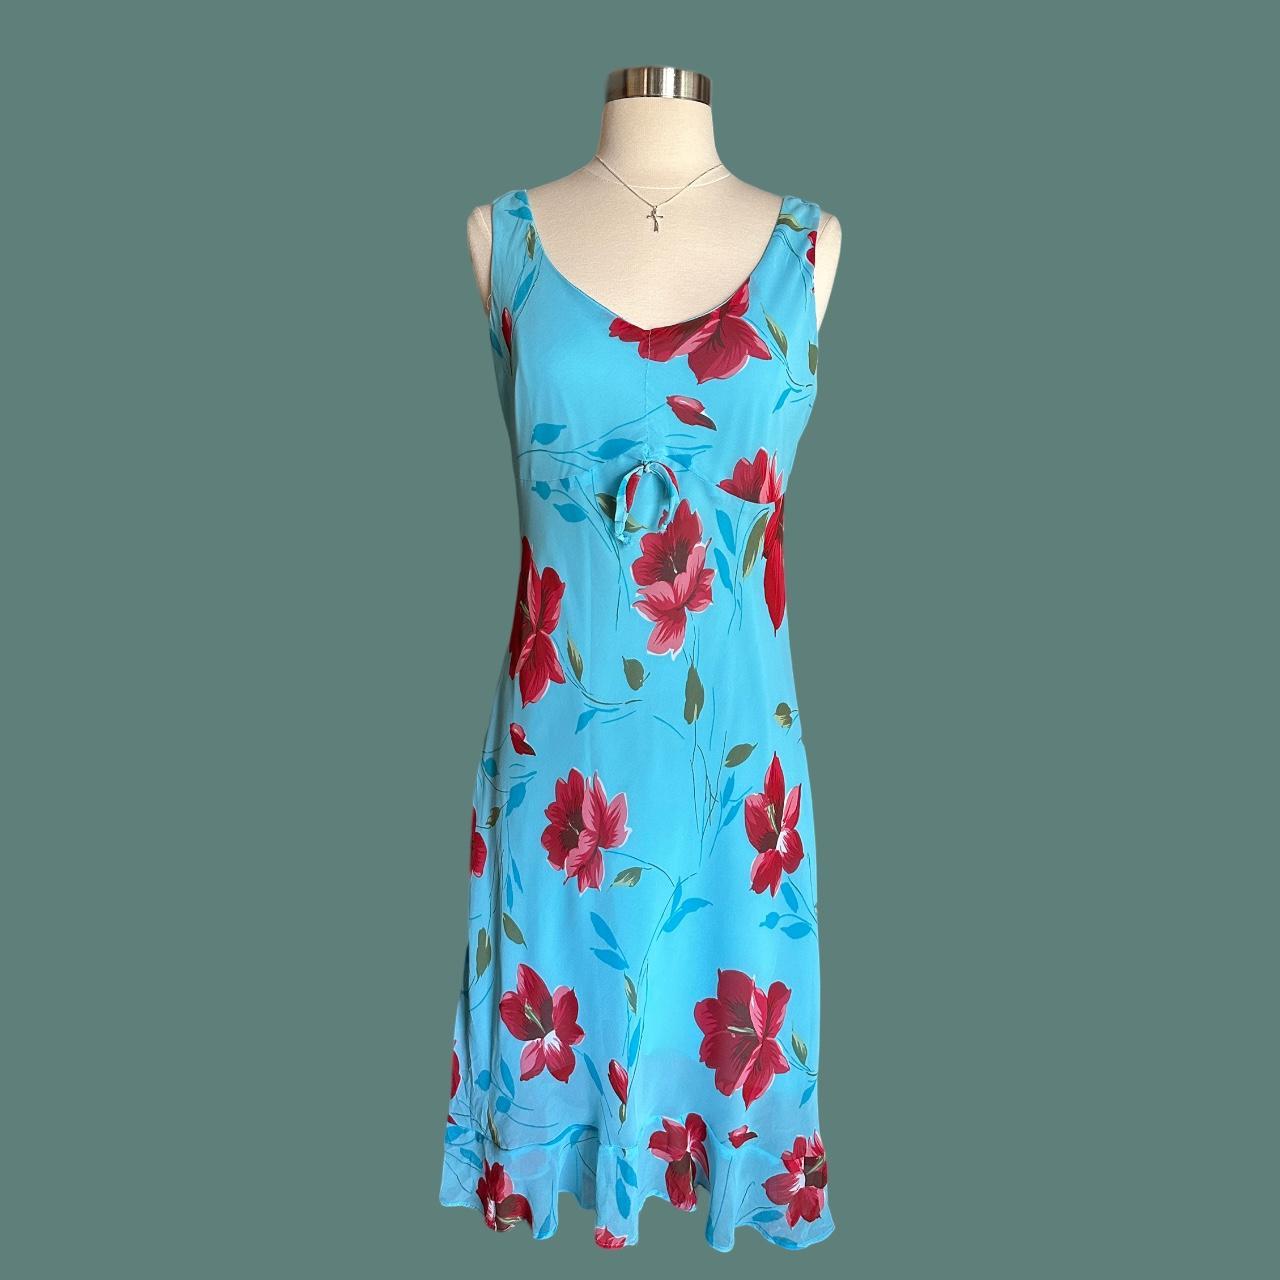 PAIGE Women's Blue and Red Dress (2)